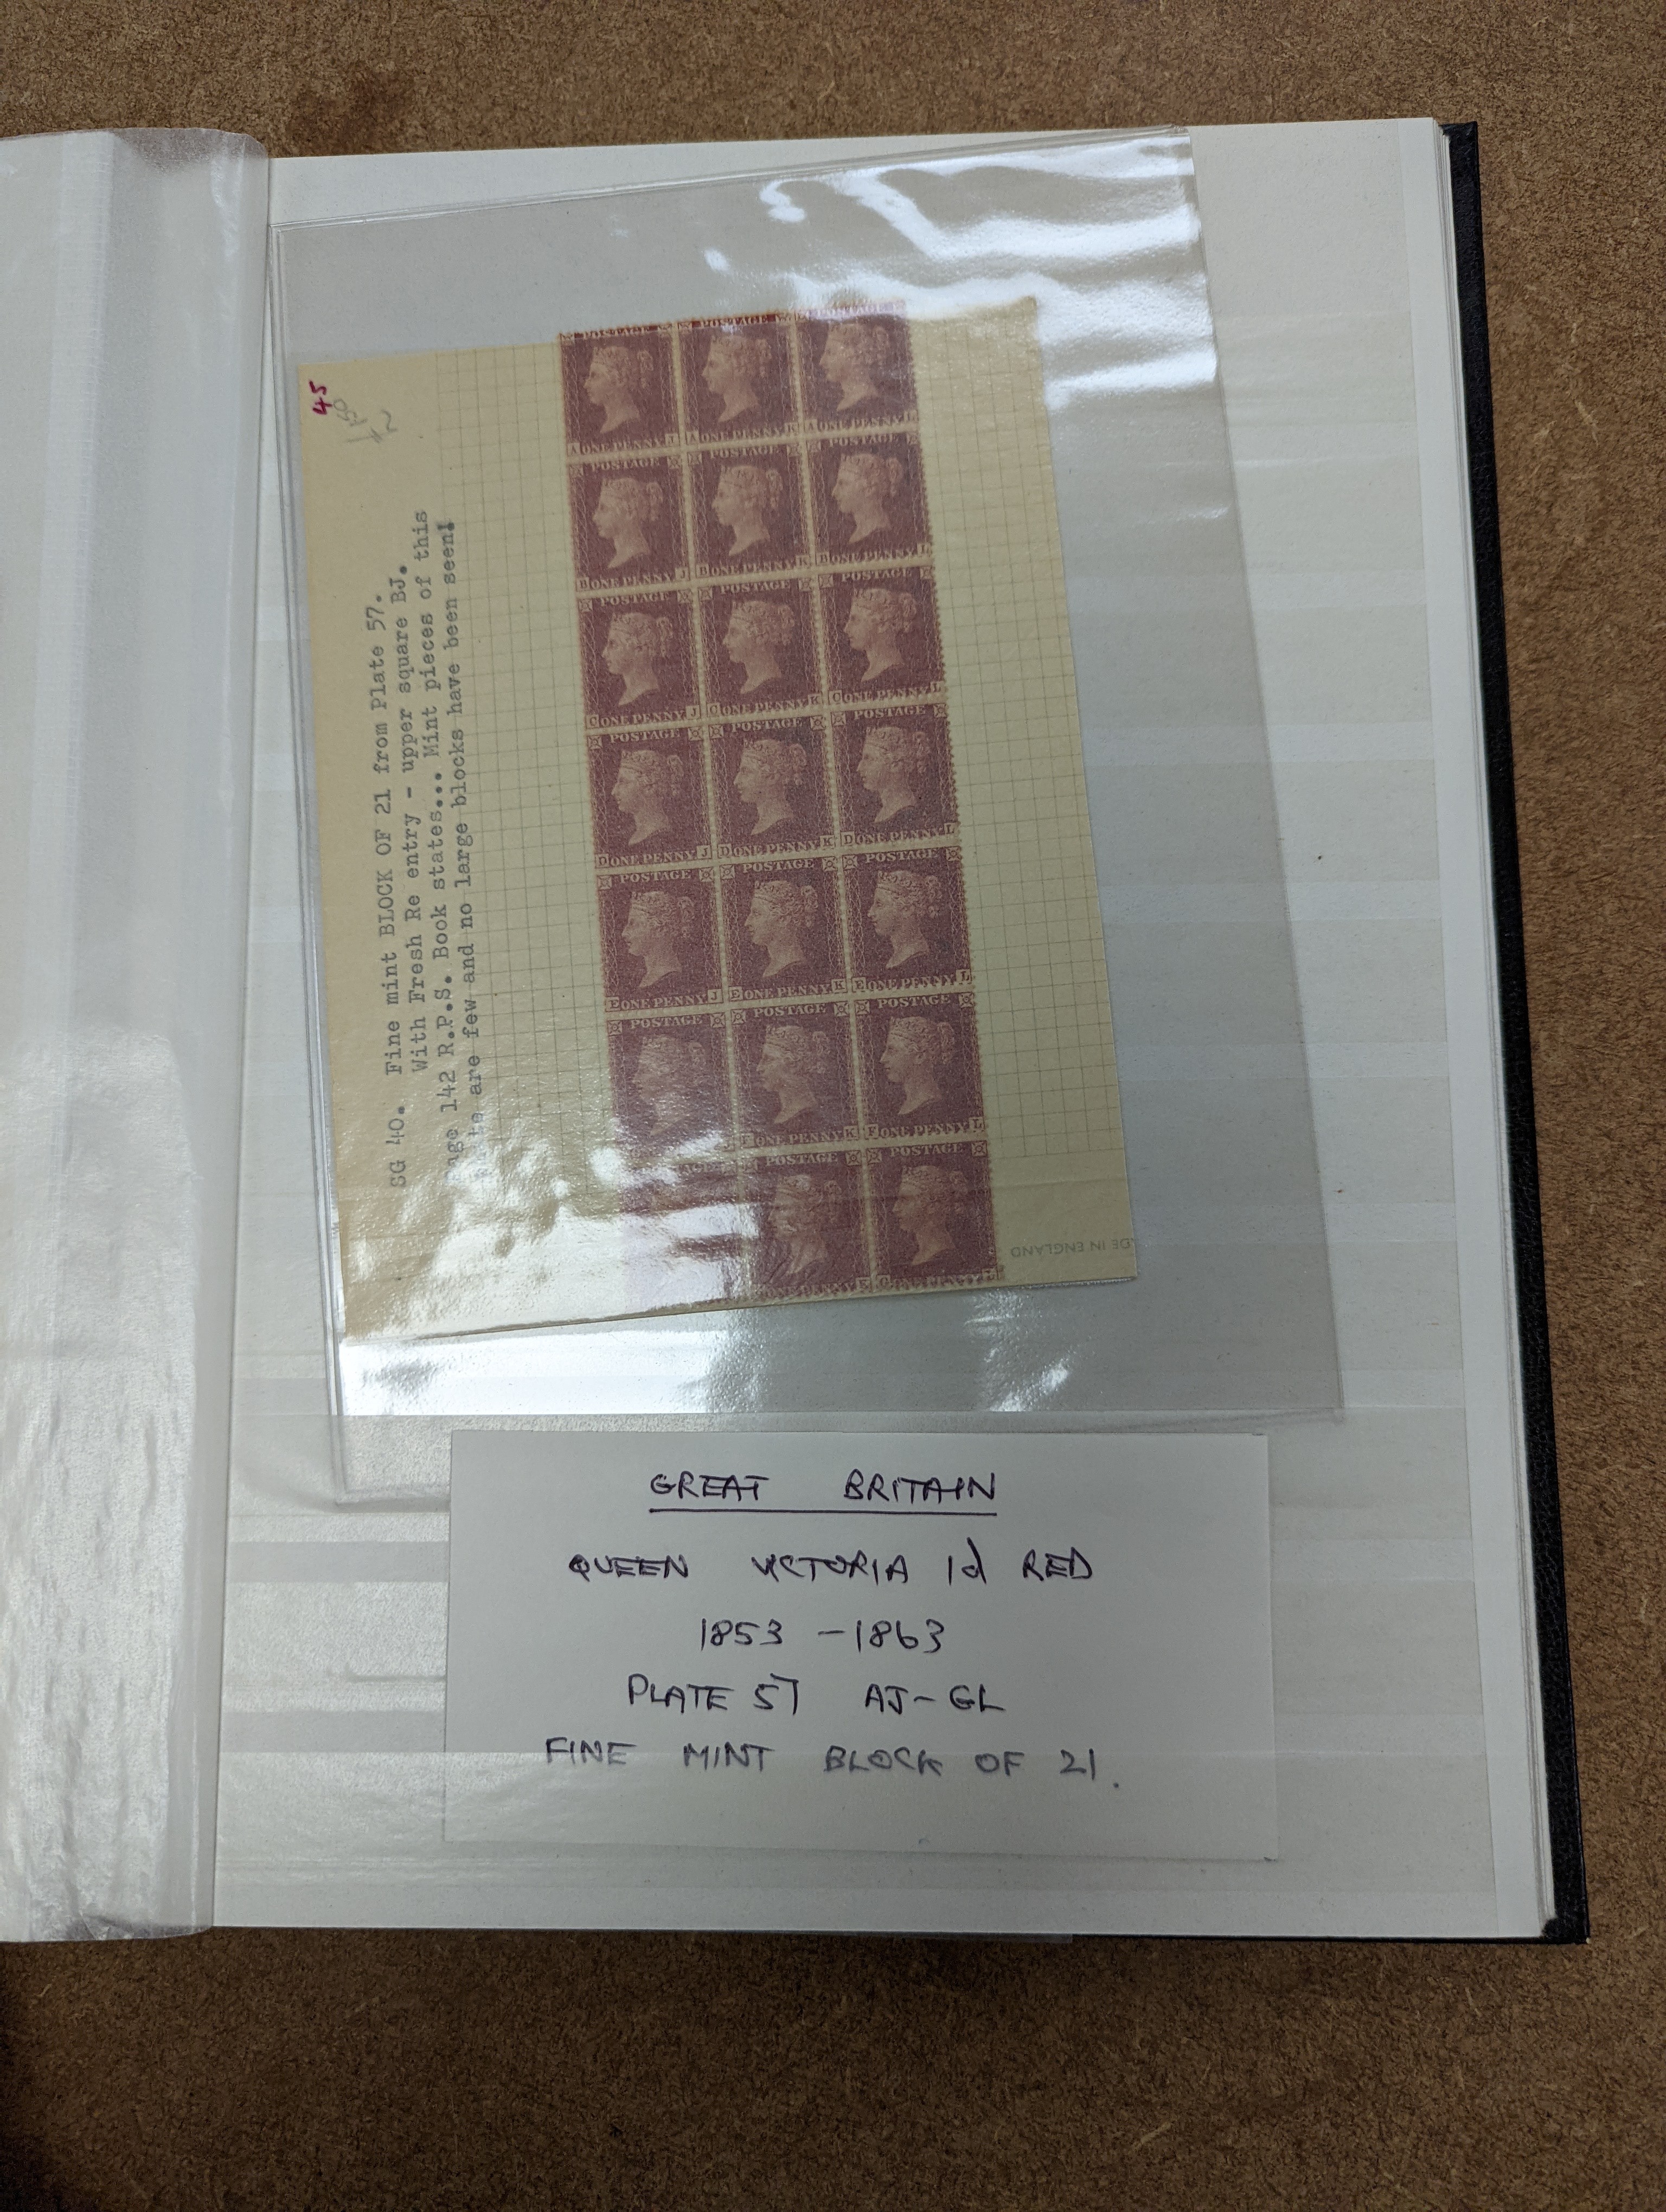 Great Britain stamps in stock book with 1840 1d black and 1841 2d blue unused. 1841 1d red brown mint block of 8, 1864-79 1d red plates in mint blocks including plate 79 block of 48, plate 170 block of 6 with marginal in